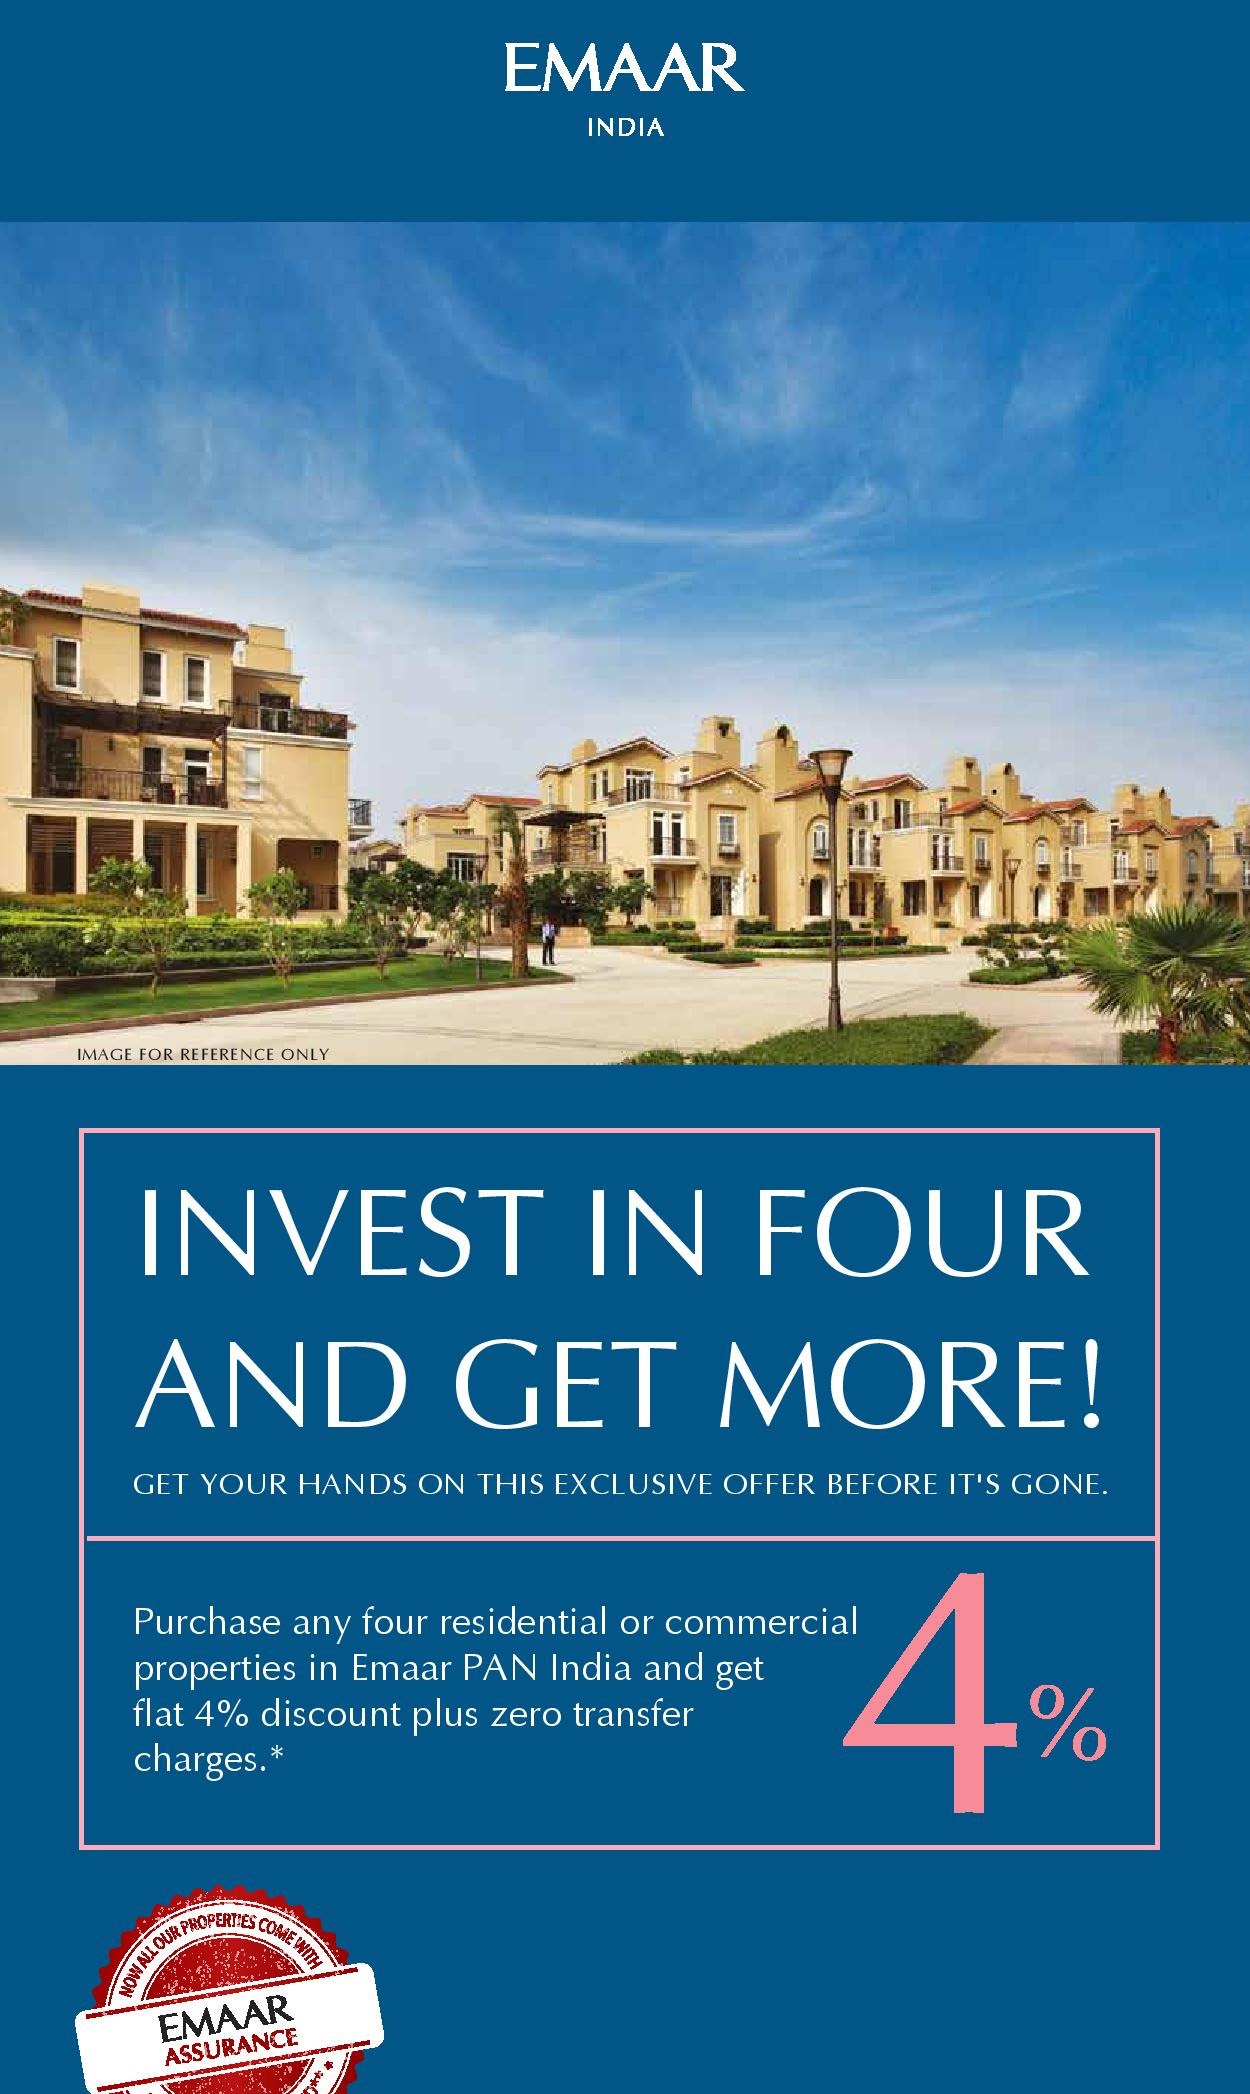 Get flat 4% discount plus zero transfer charges at Emaar India Projects